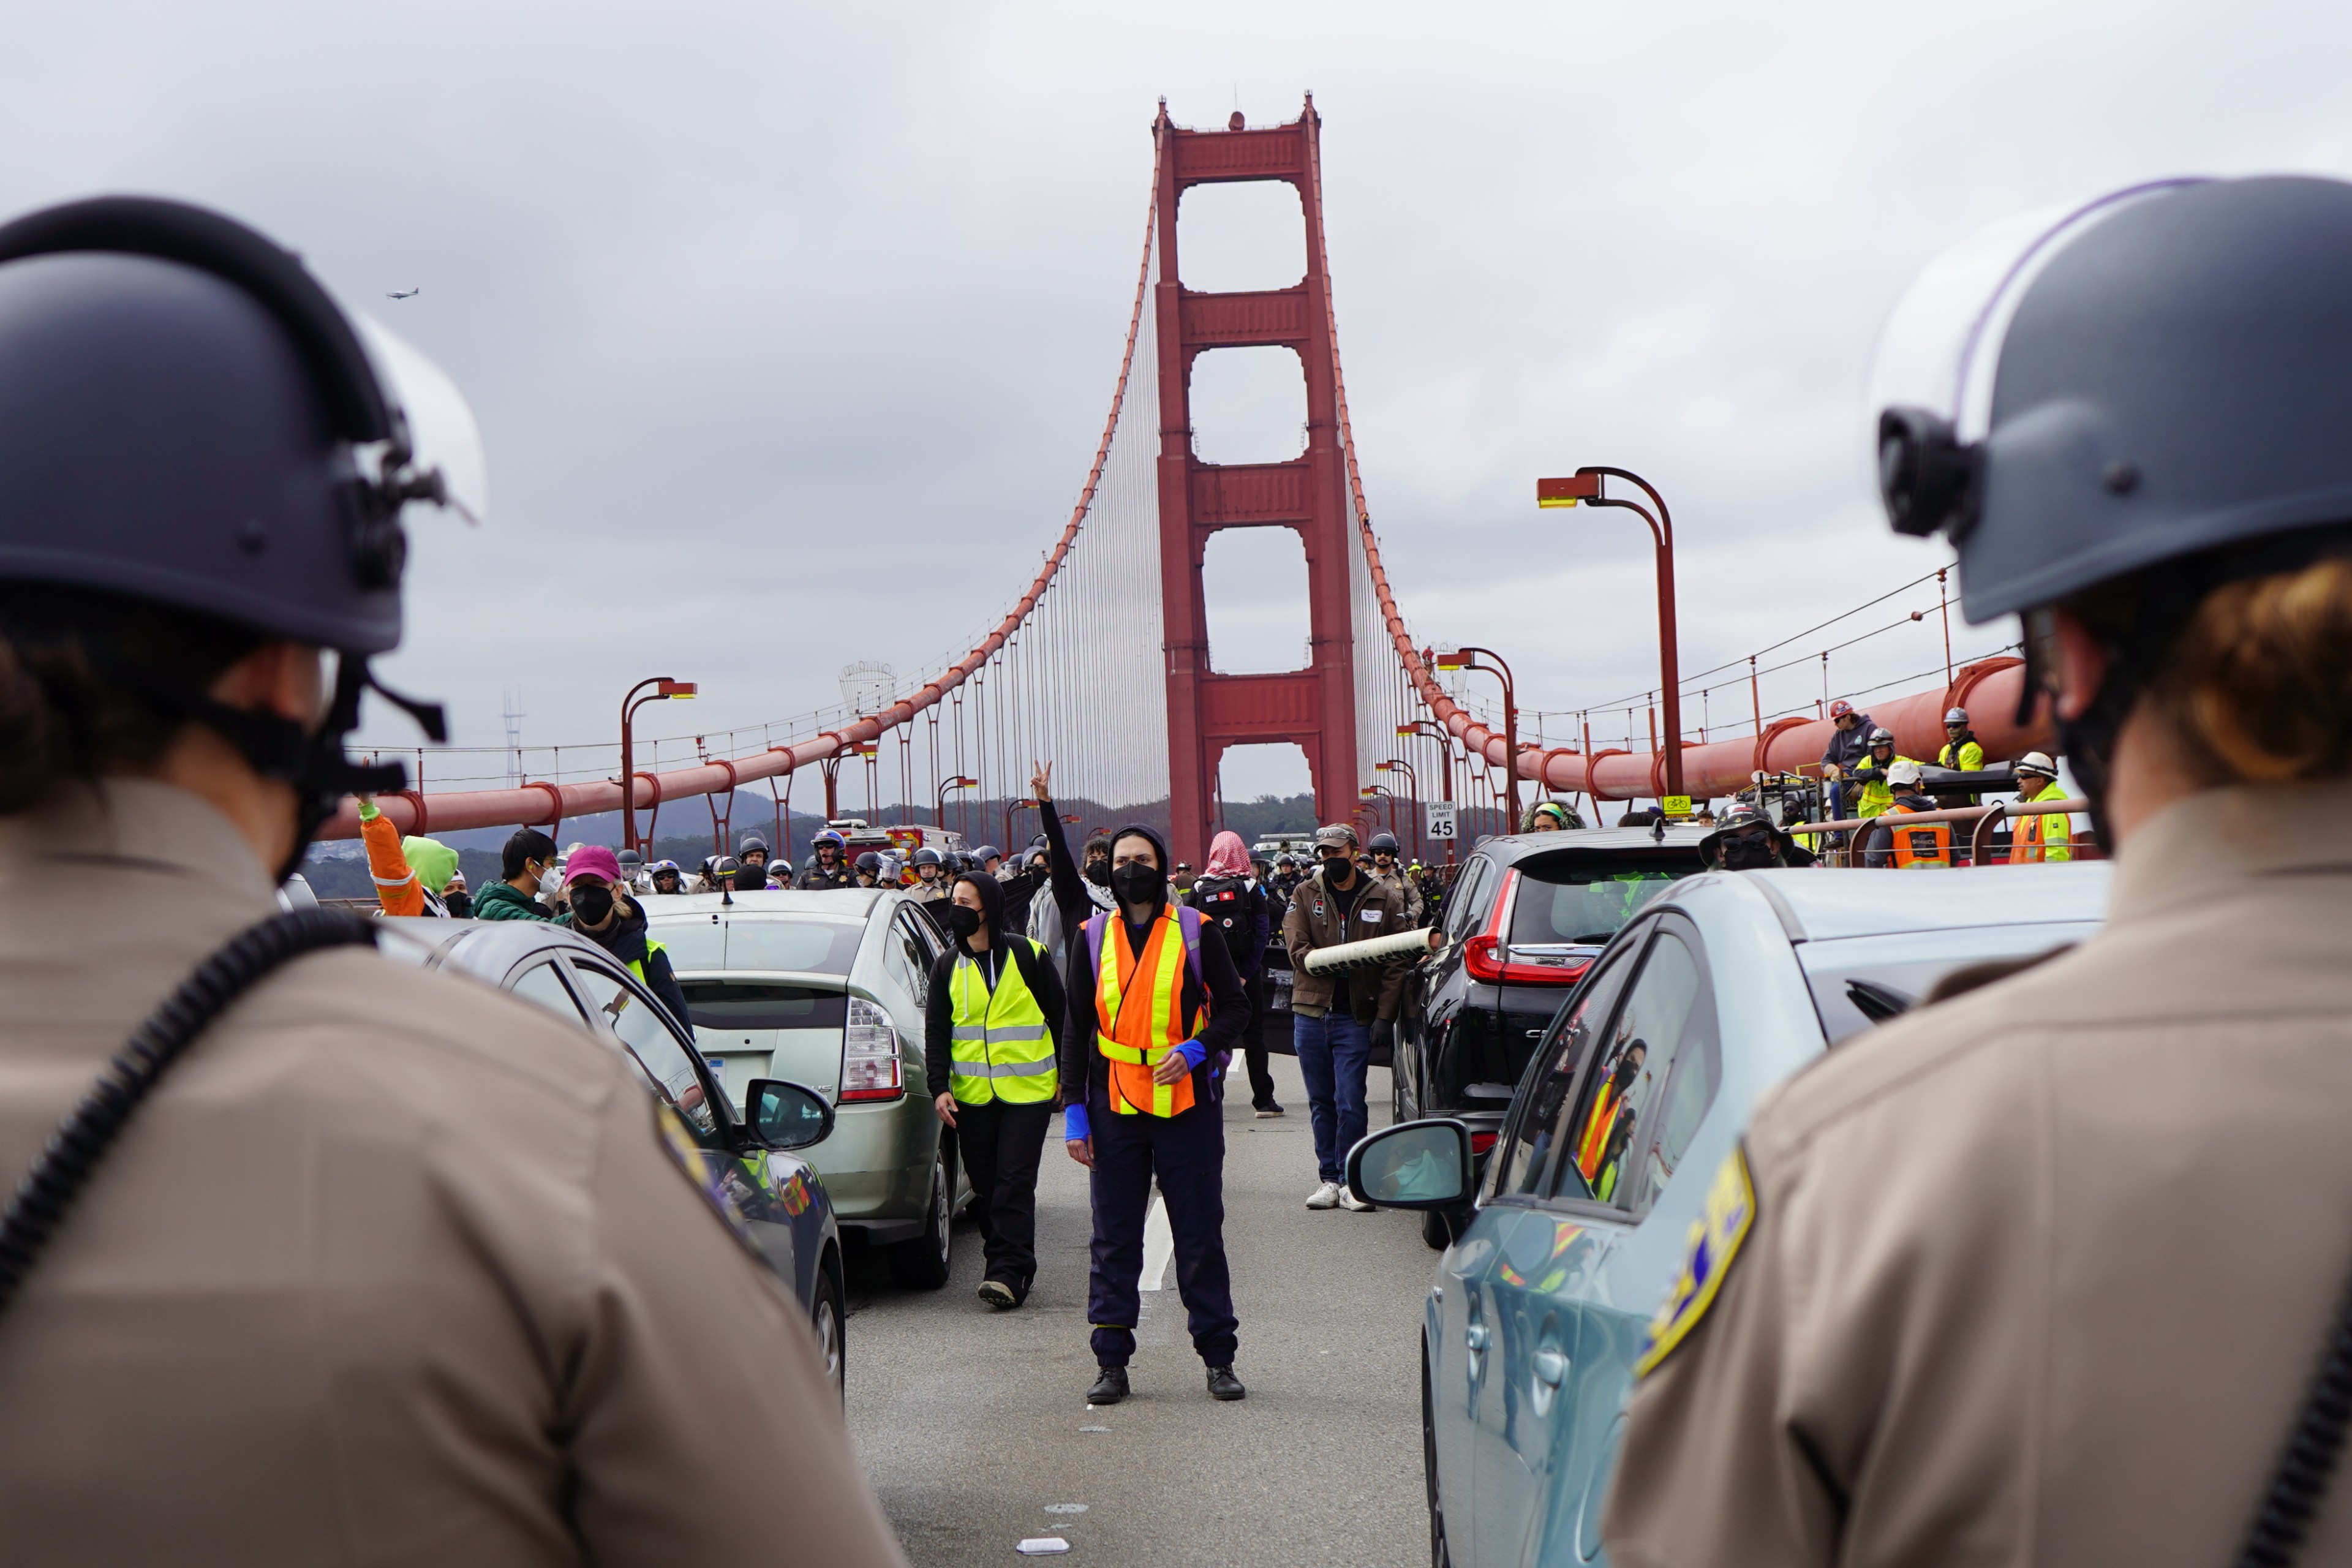 Police facing a line of stopped cars on the Golden Gate Bridge, with onlookers and emergency personnel.